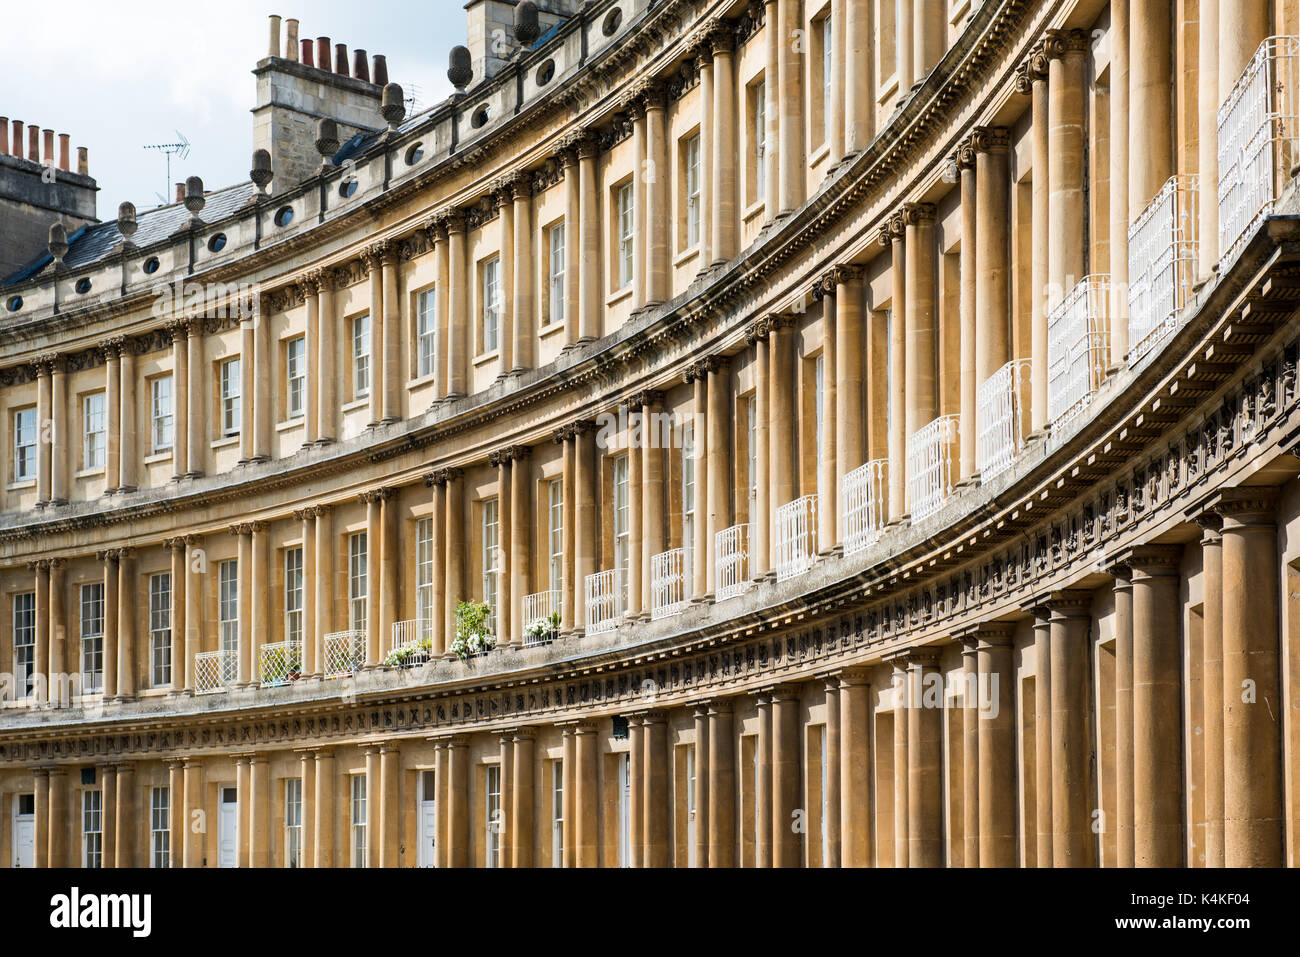 Bath, Somerset, UK. Royal Crescent - famous sweeping architecture. Stock Photo